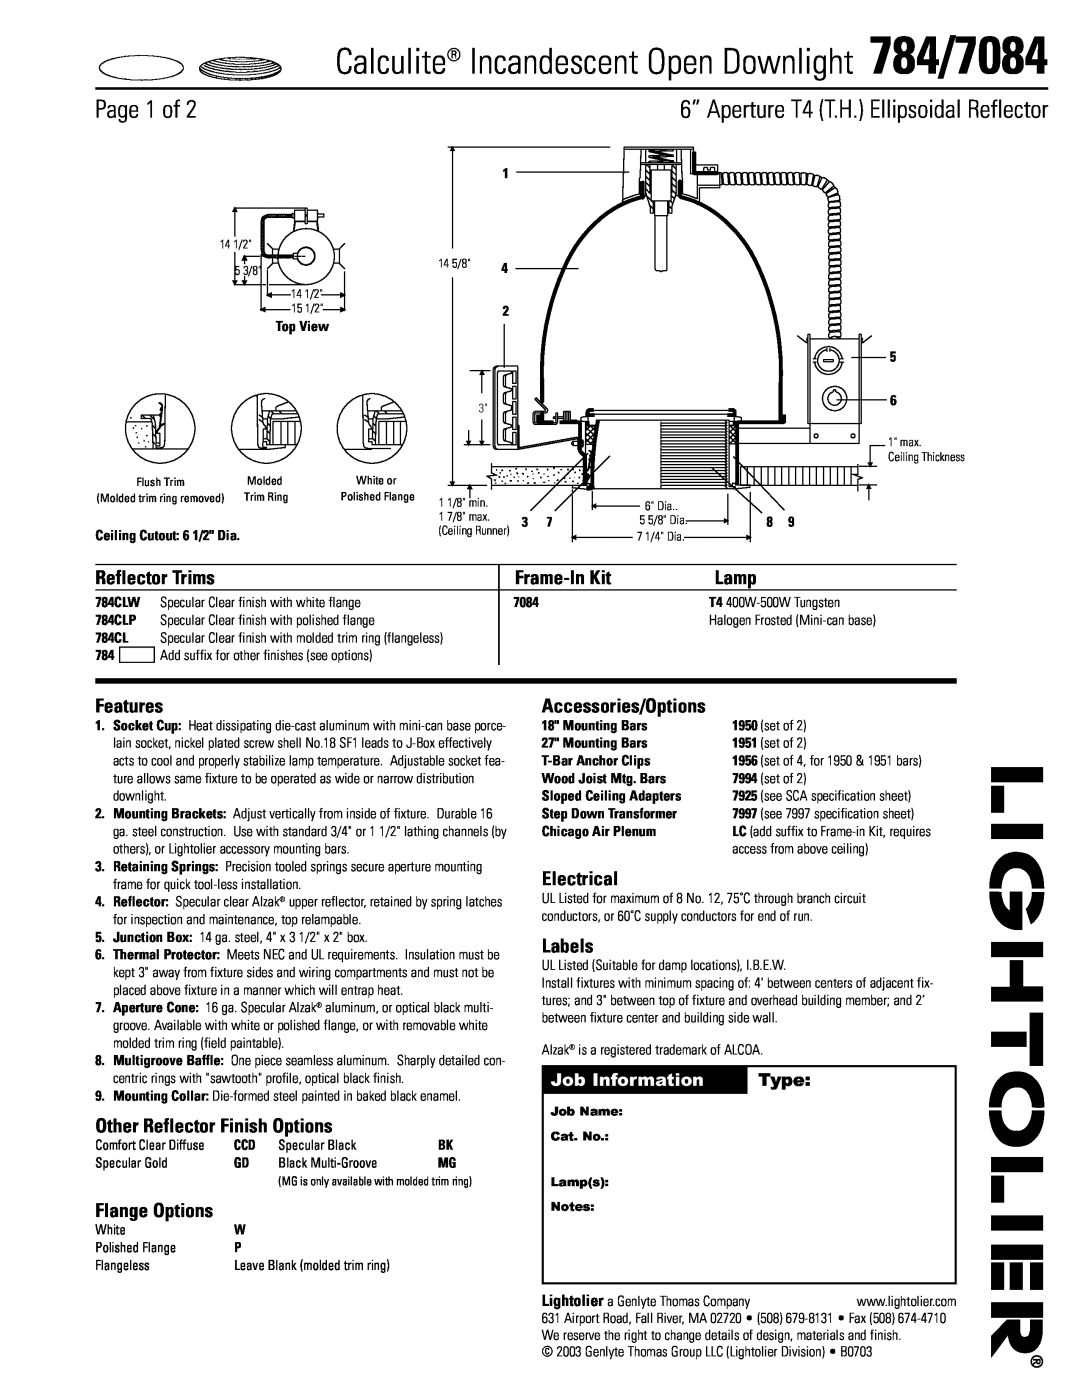 Lightolier specifications Calculite Incandescent Open Downlight 784/7084, Page 1 of, Job Information, Type, Frame-InKit 